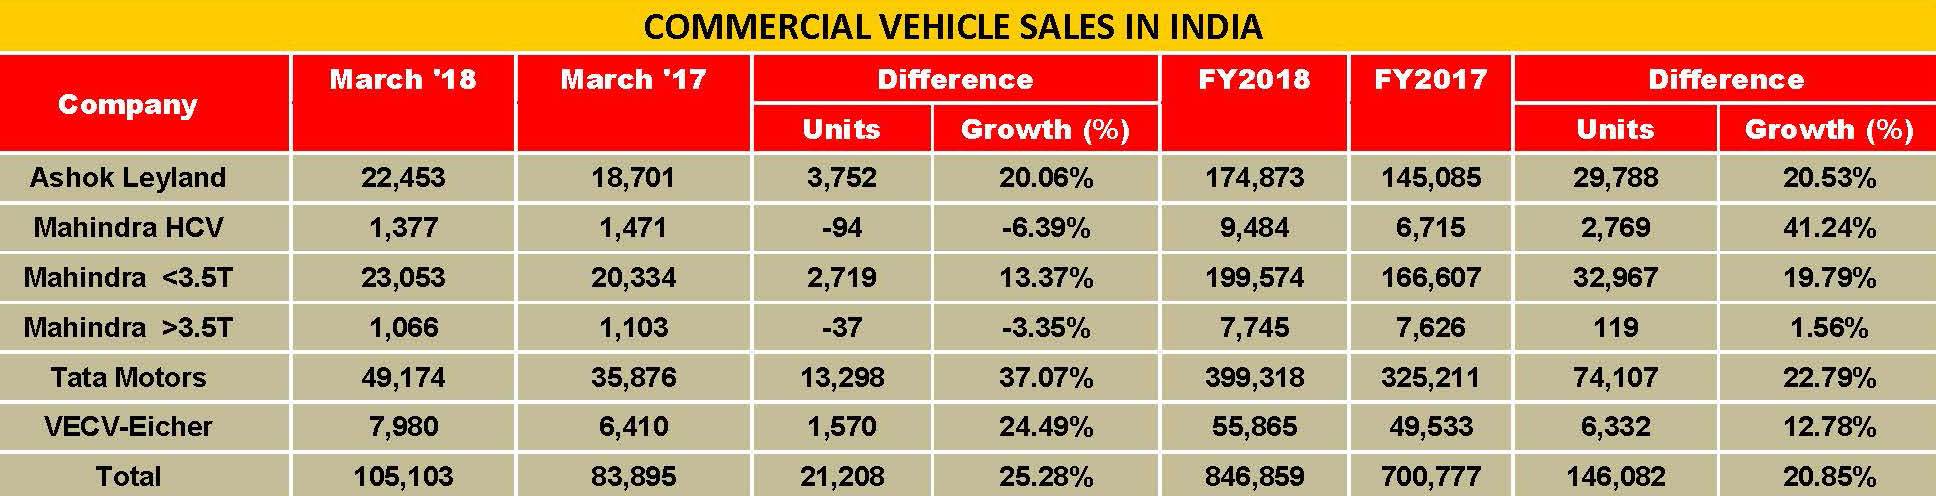 commercial-vehicle-sales-in-india